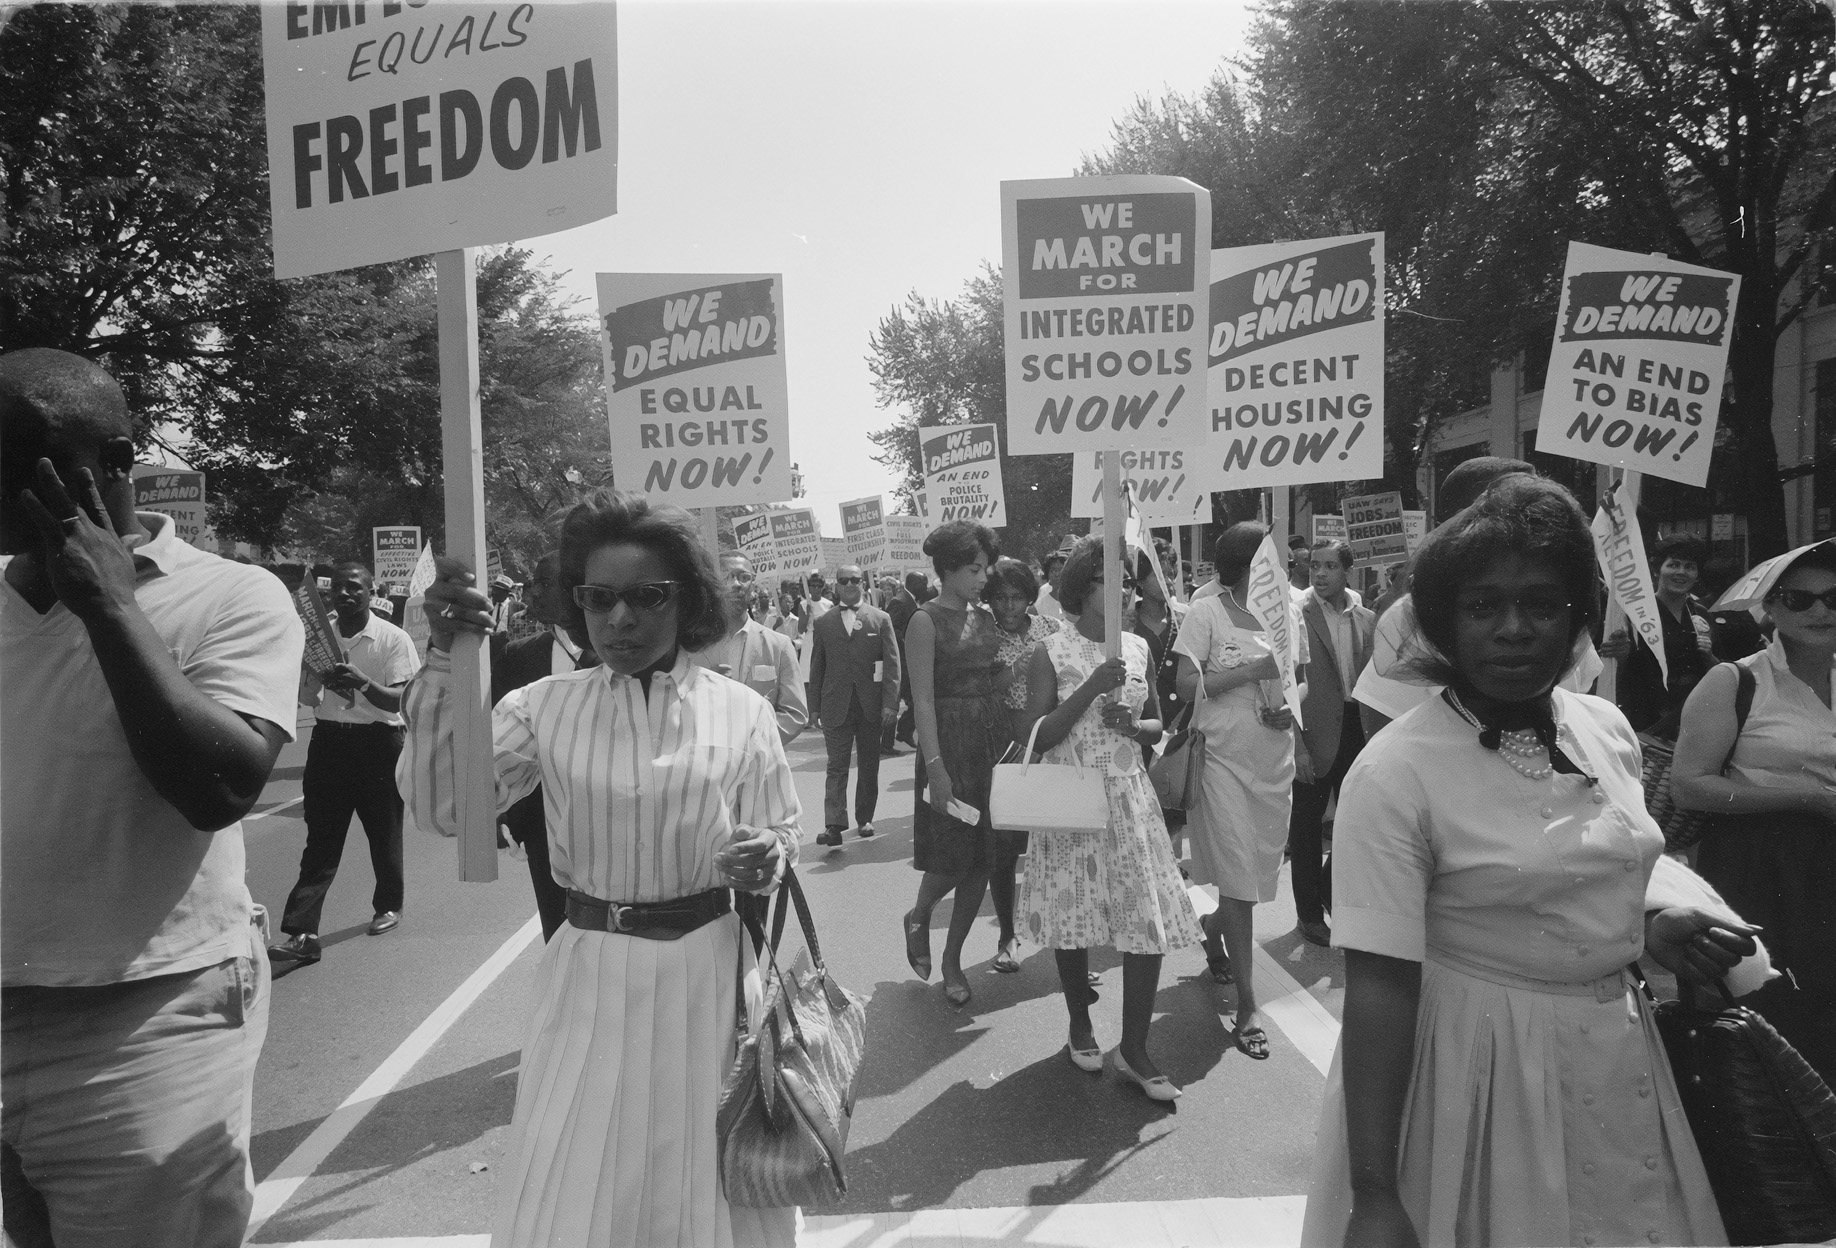 At the 1963 March on Washington for Jobs and Freedom protestors carry signs demanding decent housing, integrated schools, civil rights, freedom, and an end to bias.